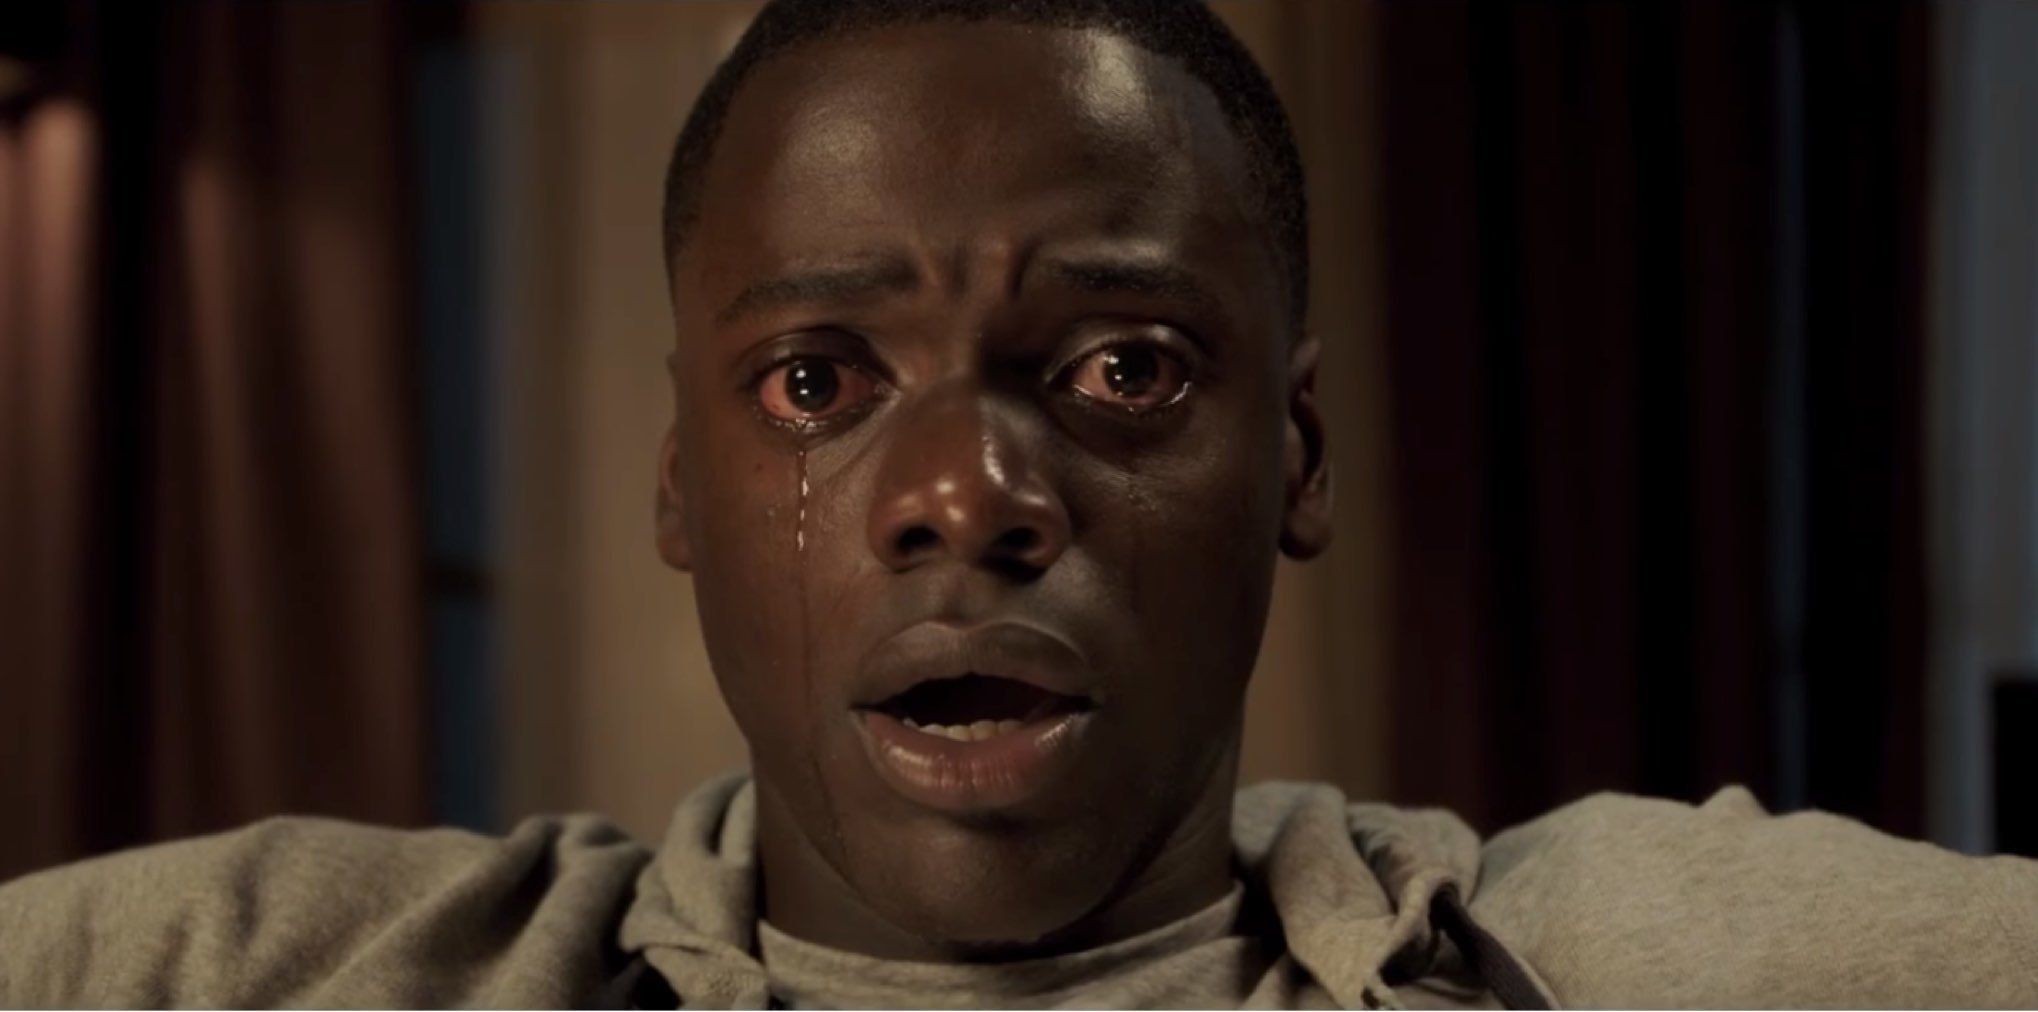 Jordan Peele S Horror Movie Hit Get Out Could Have Had A Much Darker Ending